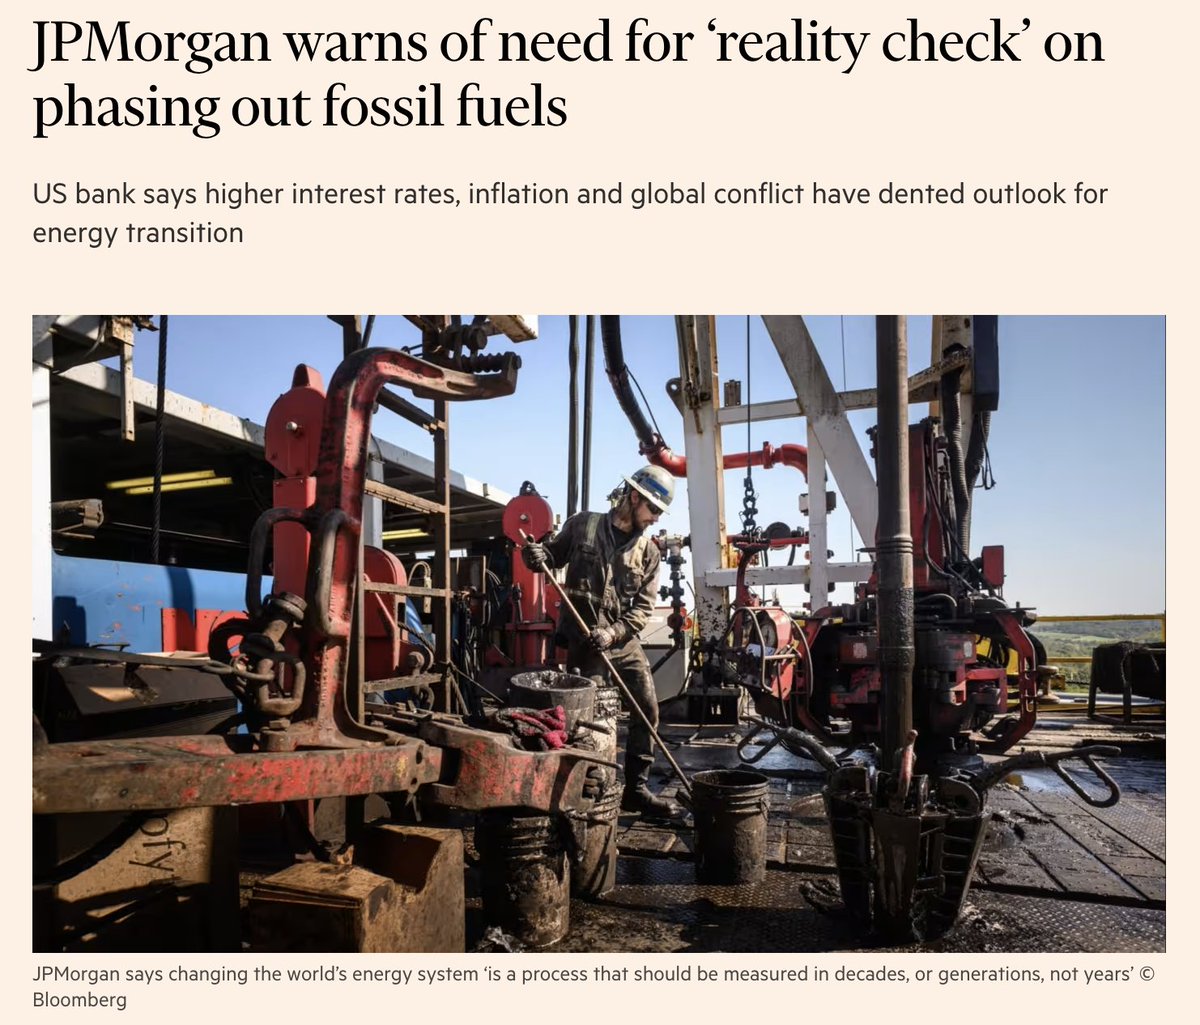 JP Morgan forecasts building more wind, solar & electric vehicle capacity could increase oil production by 2 million barrels per day by 2030. Mining, manufacturing, & transporting materials used to make alt energy technologies is 100% reliant on fossil fuels.